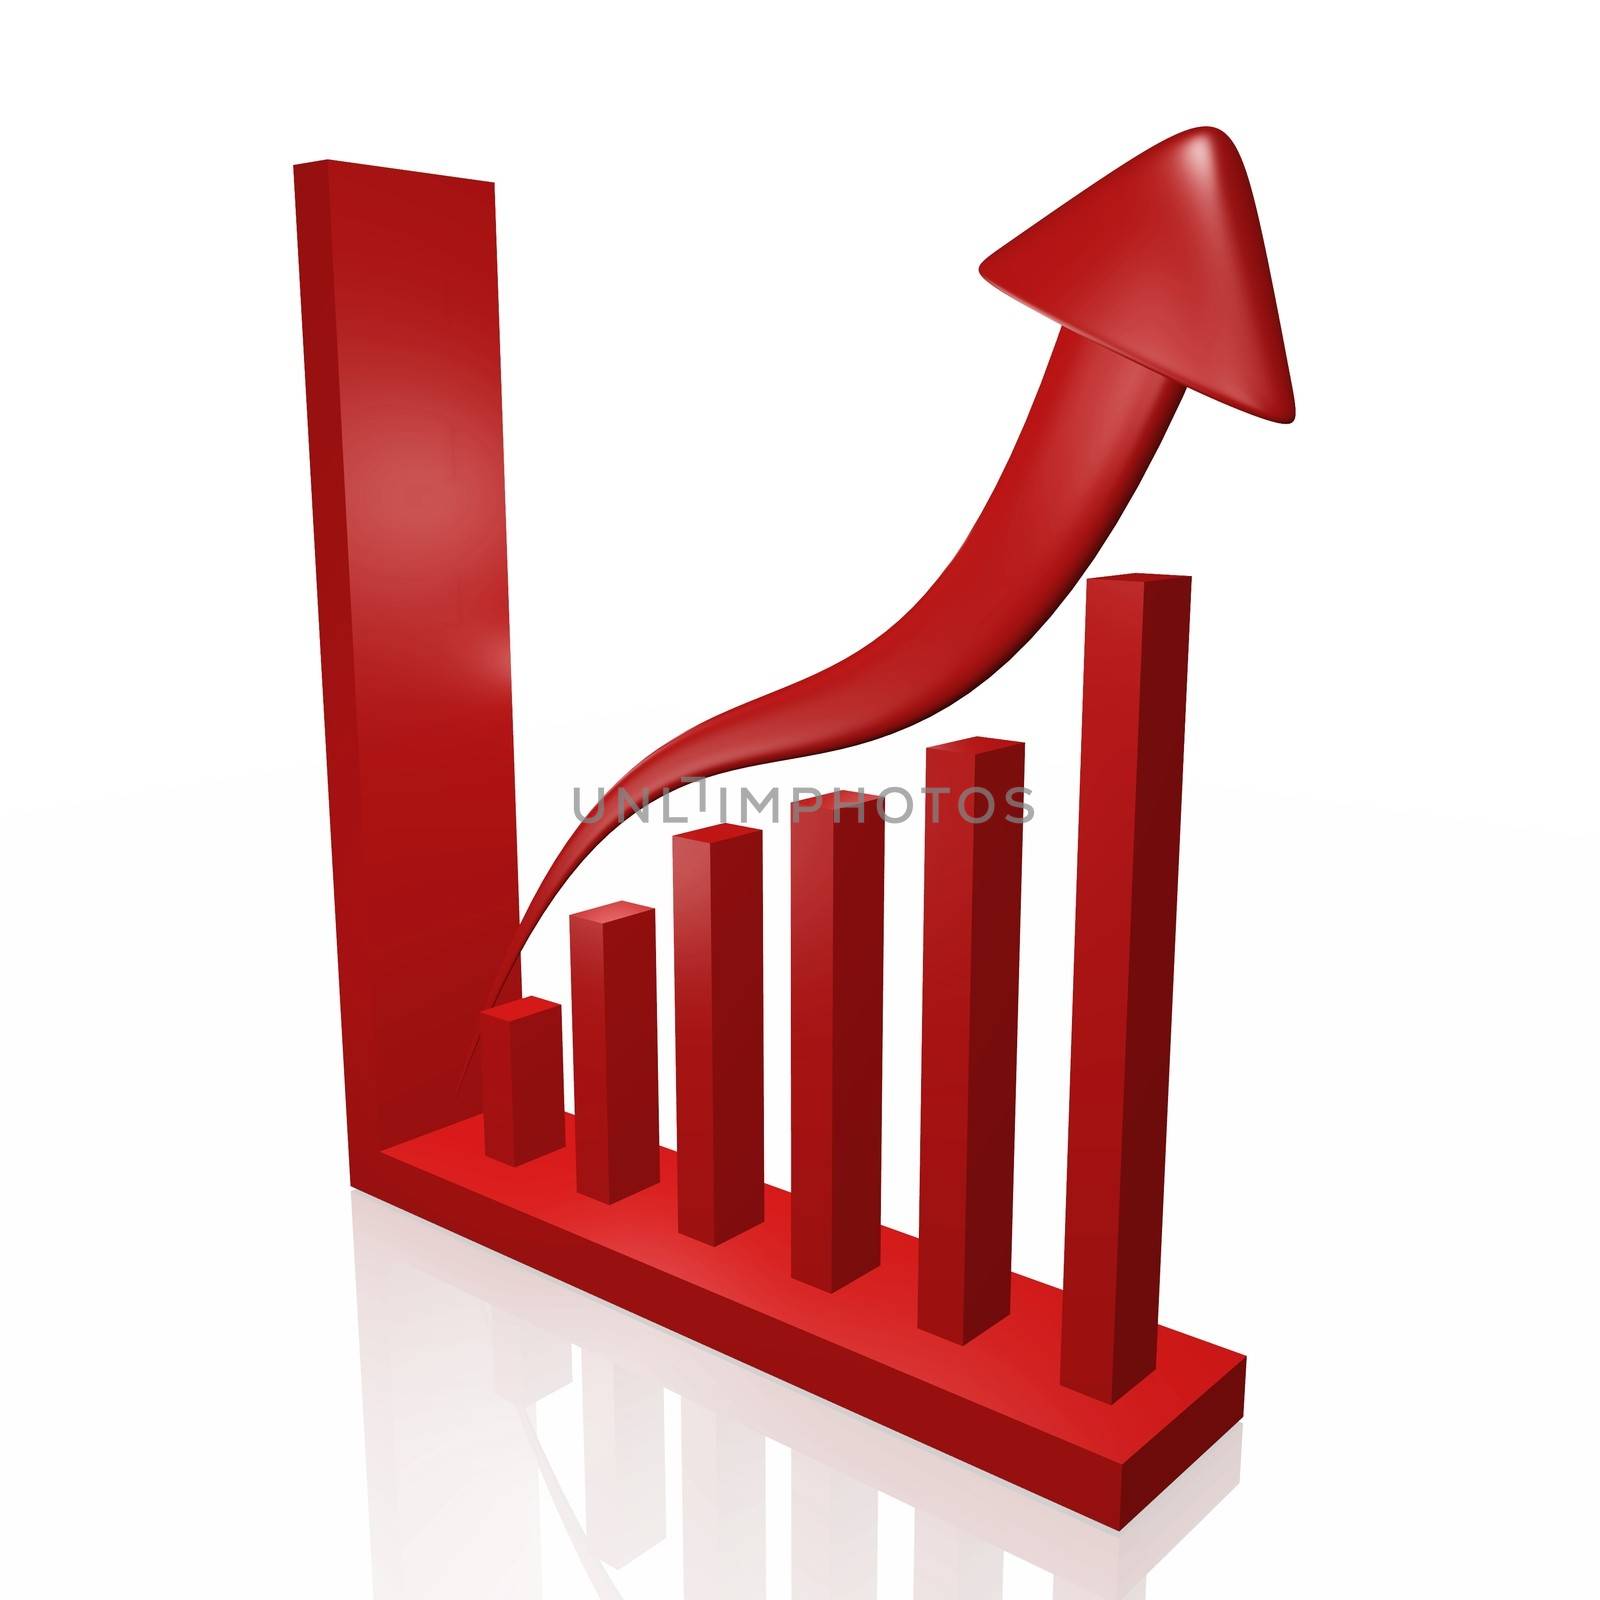 A 3 dimensional red growth bar chart with upward moving arrow demonstrating business, financial, career or investment growth.
